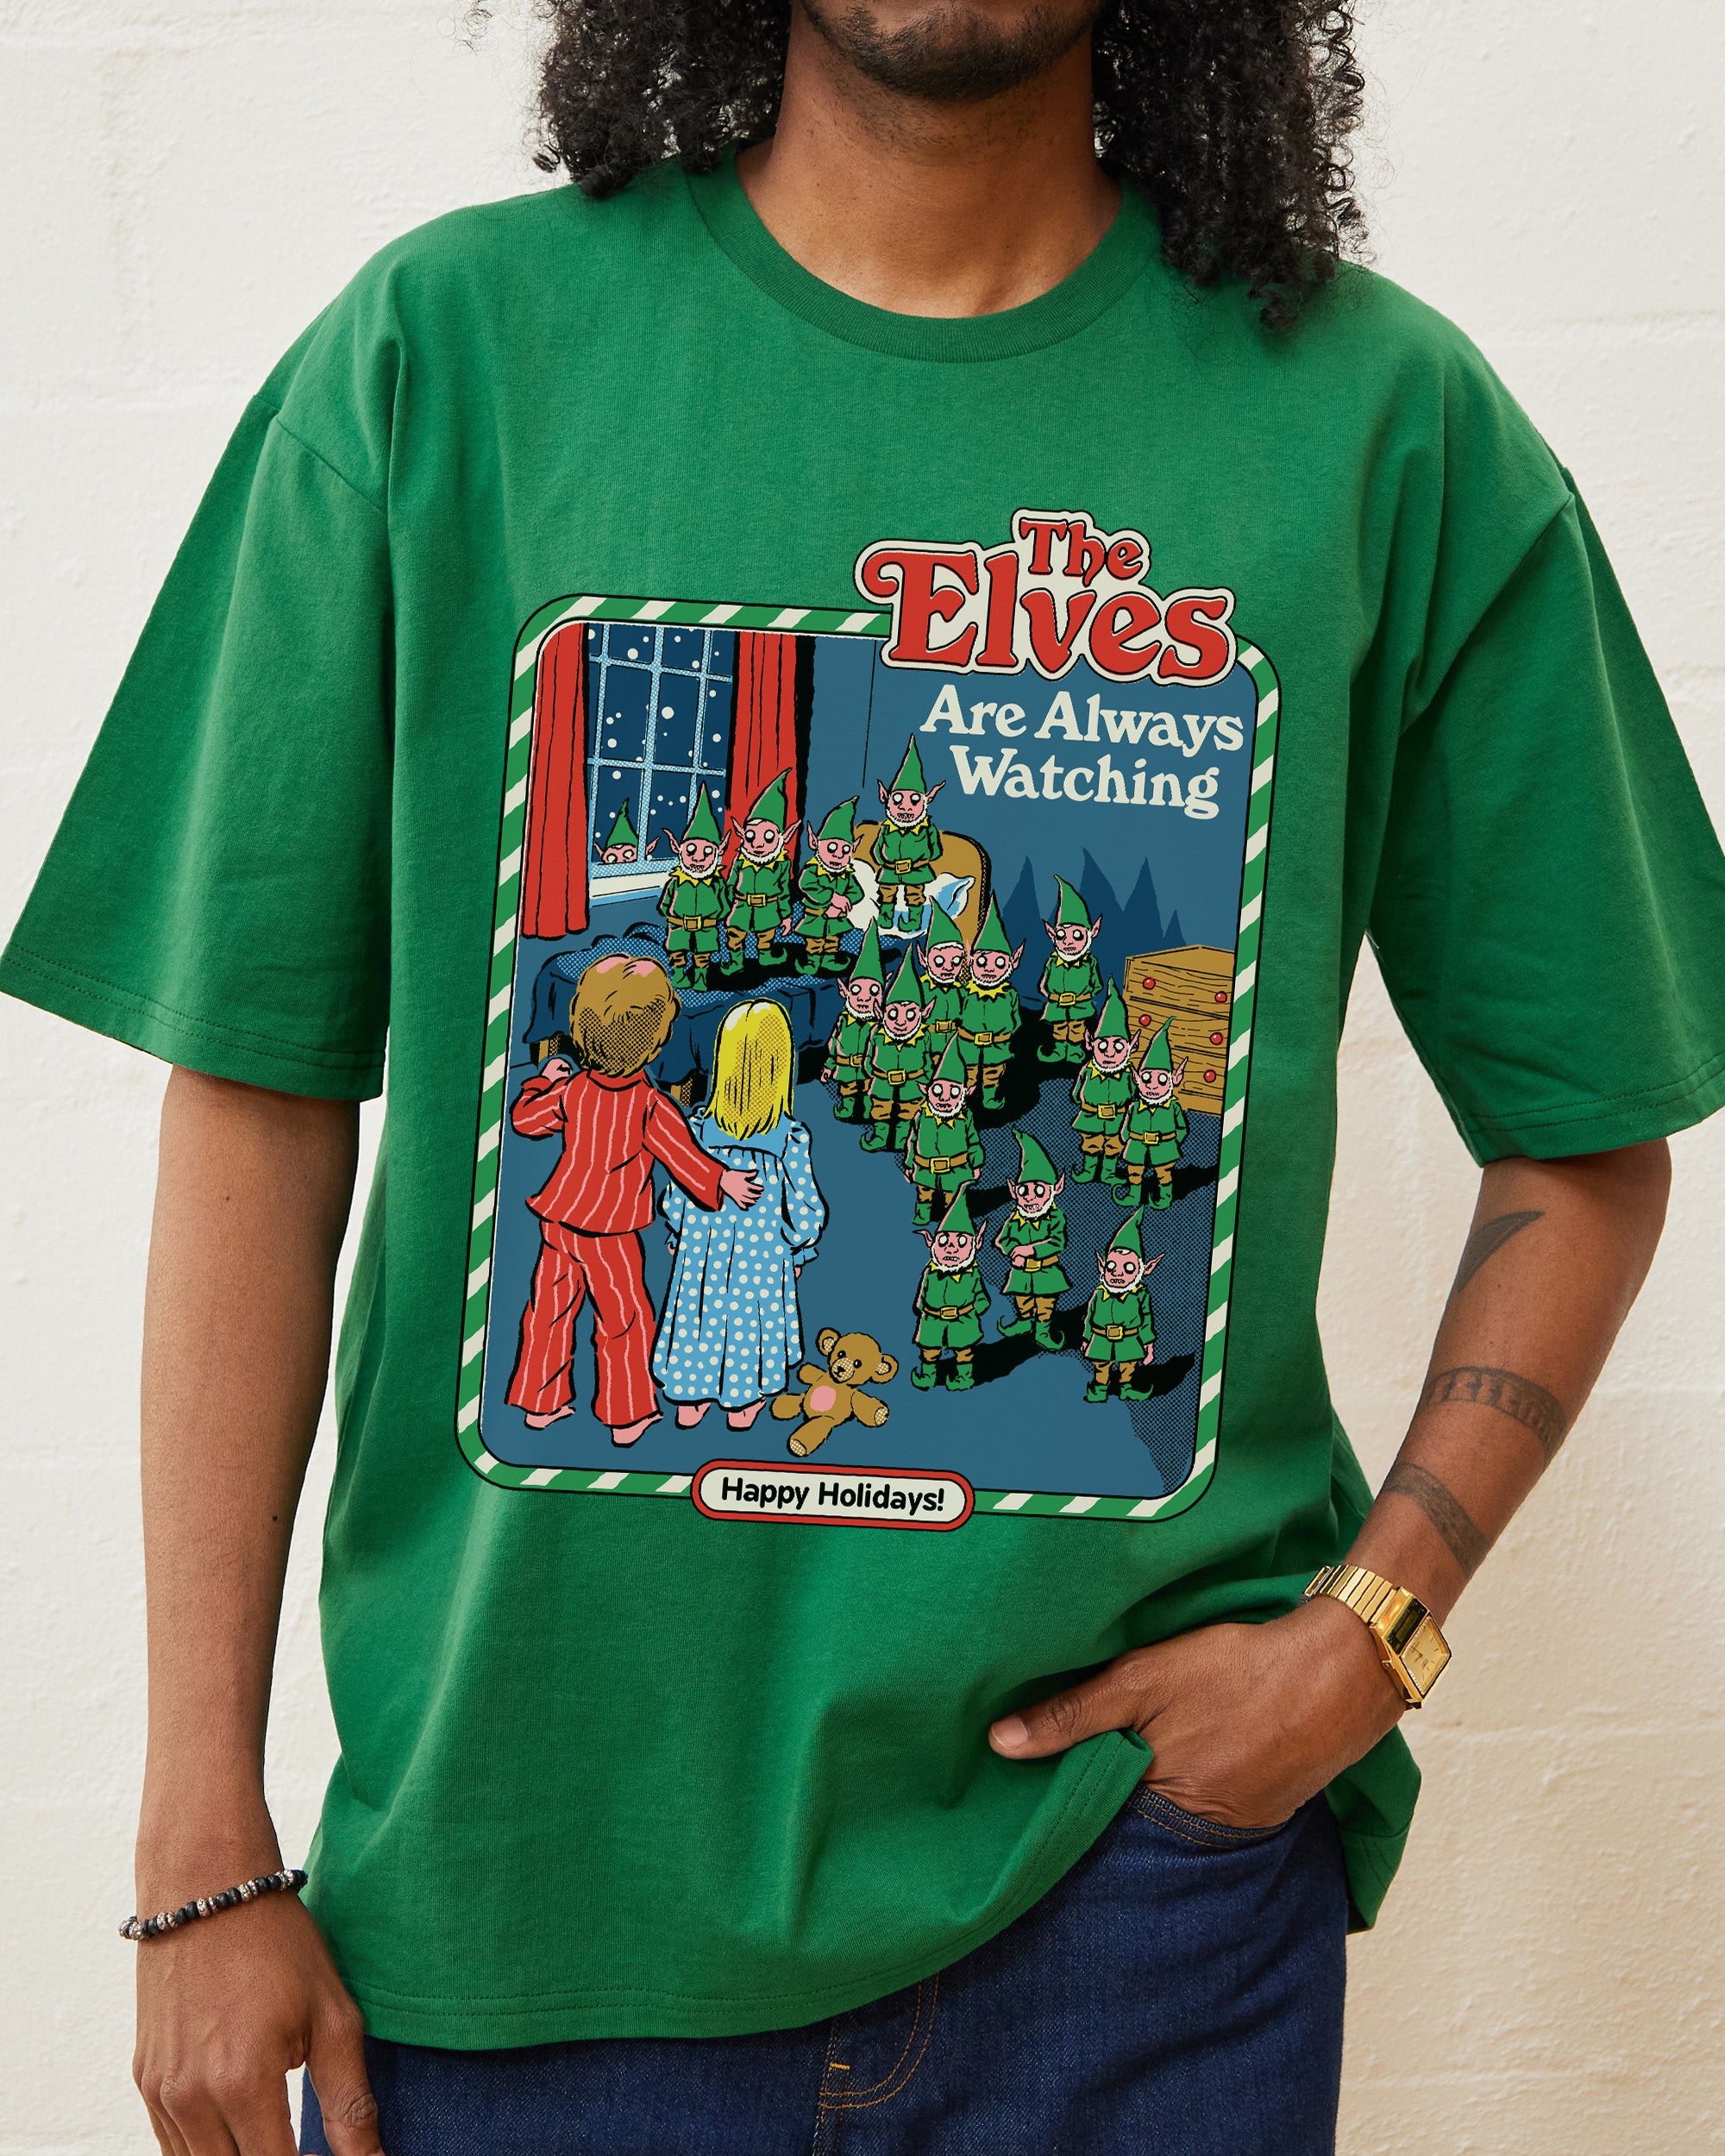 The Elves are Always Watching T-Shirt